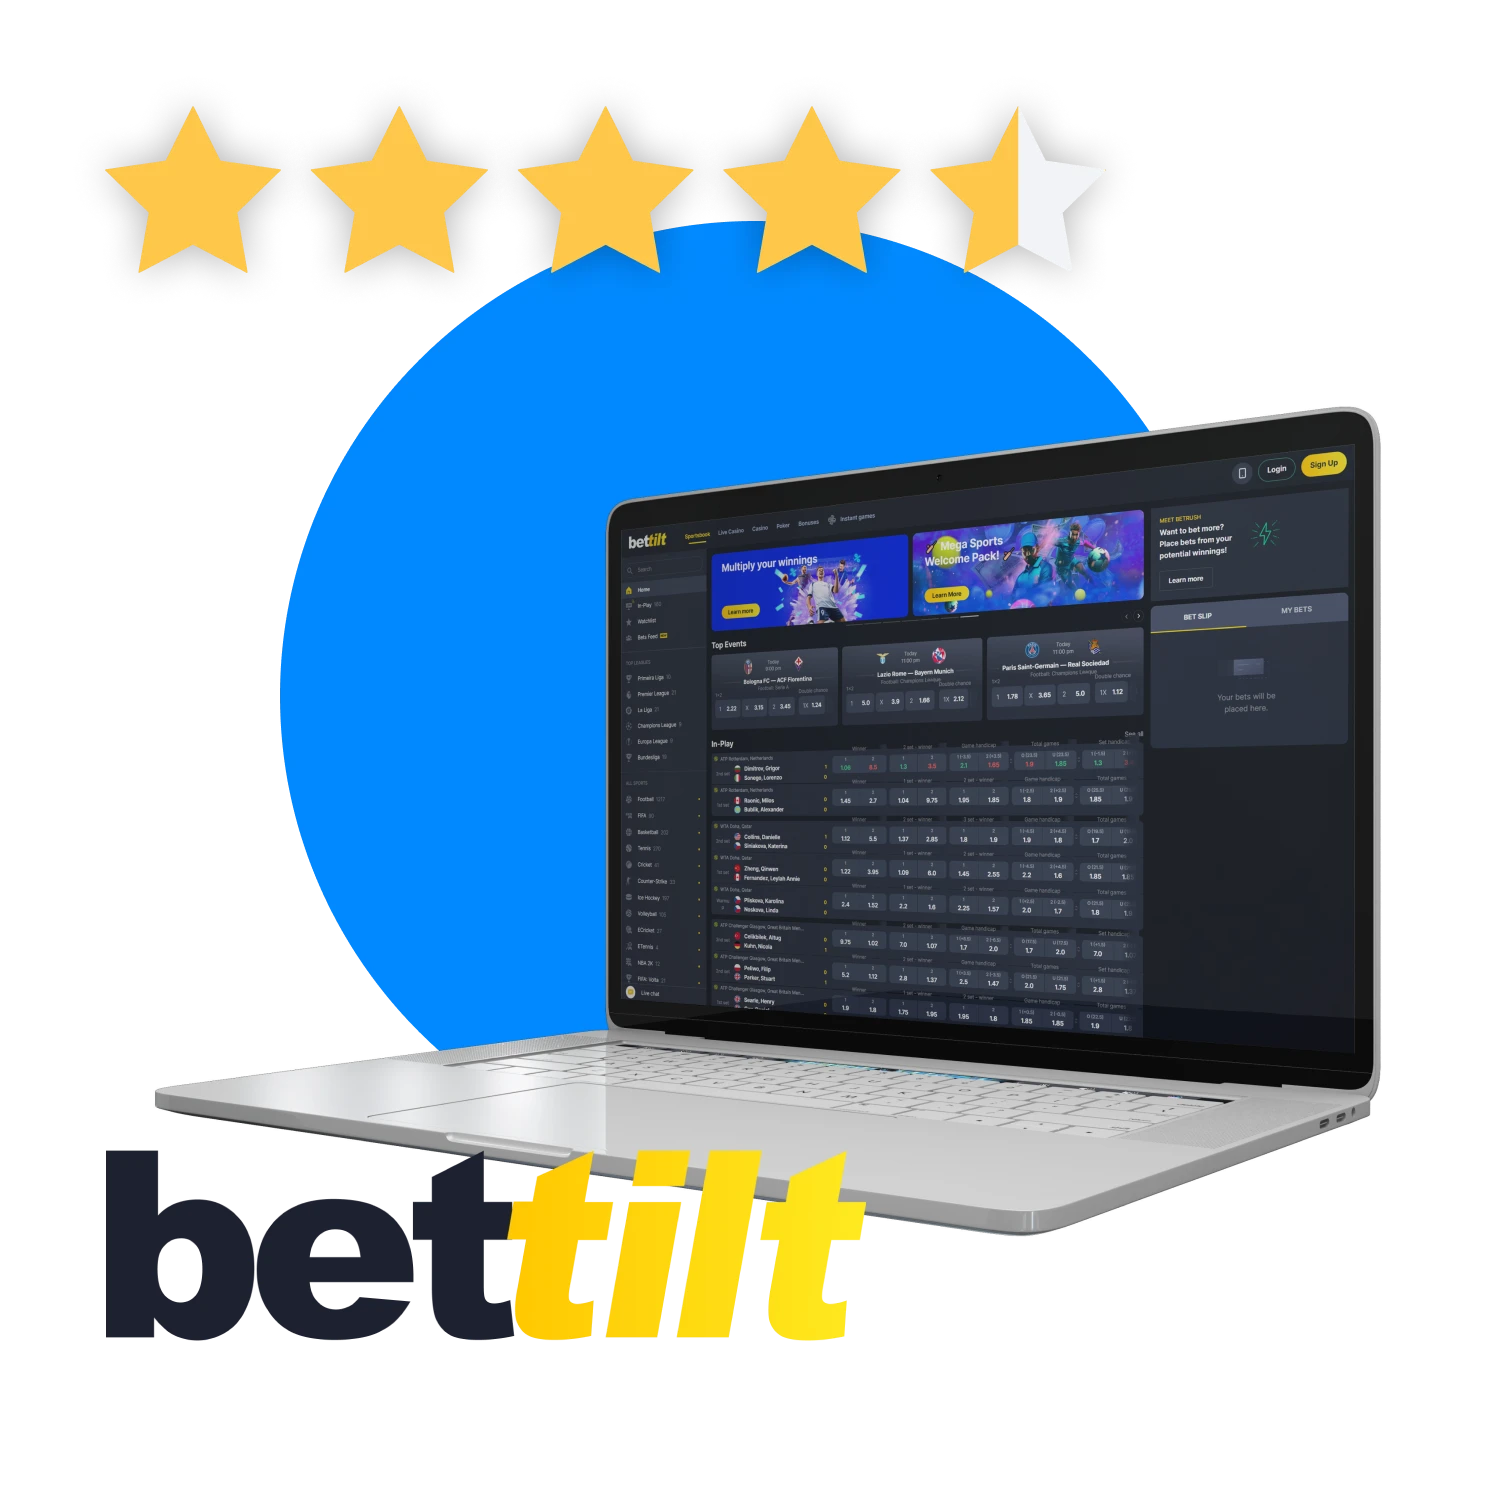 Find out how Bettilt is rated.